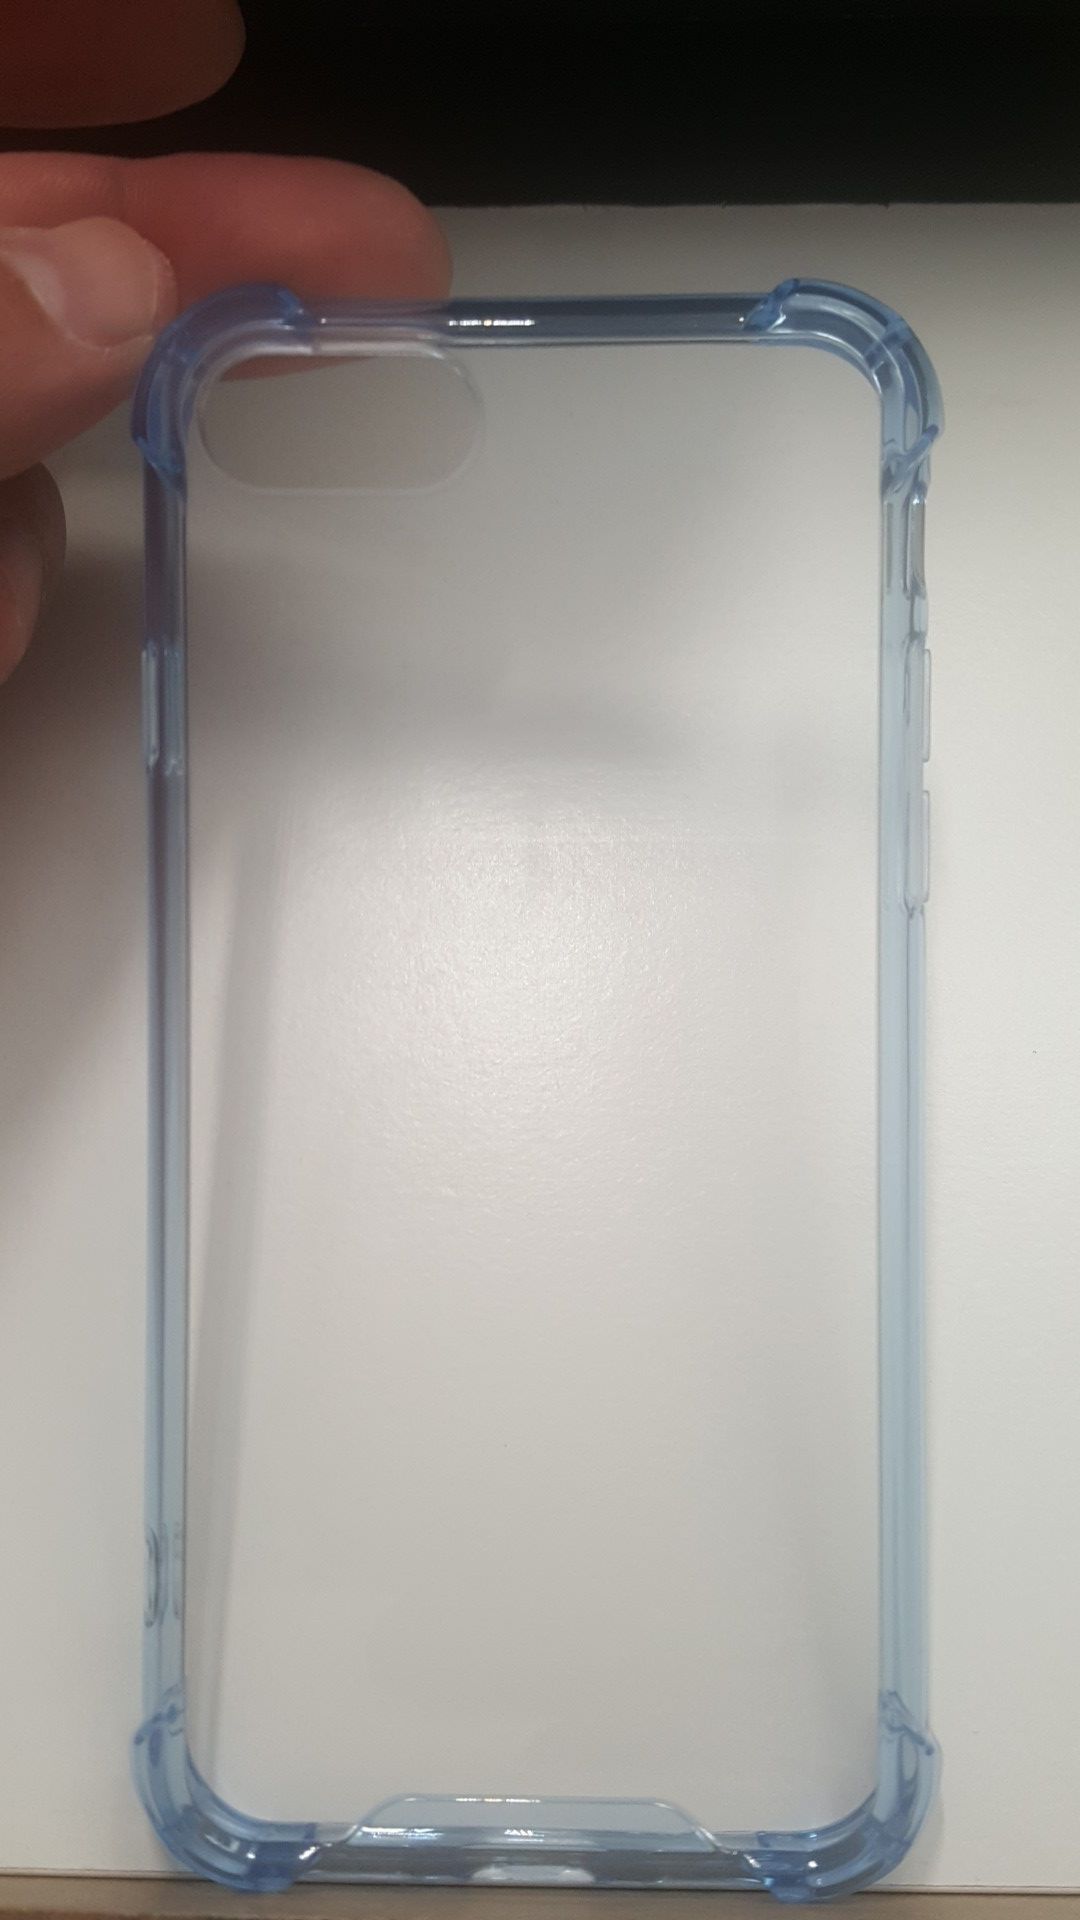 Case for iphone 7/8 4.7" not plus clear-blue new 7firm shiping only